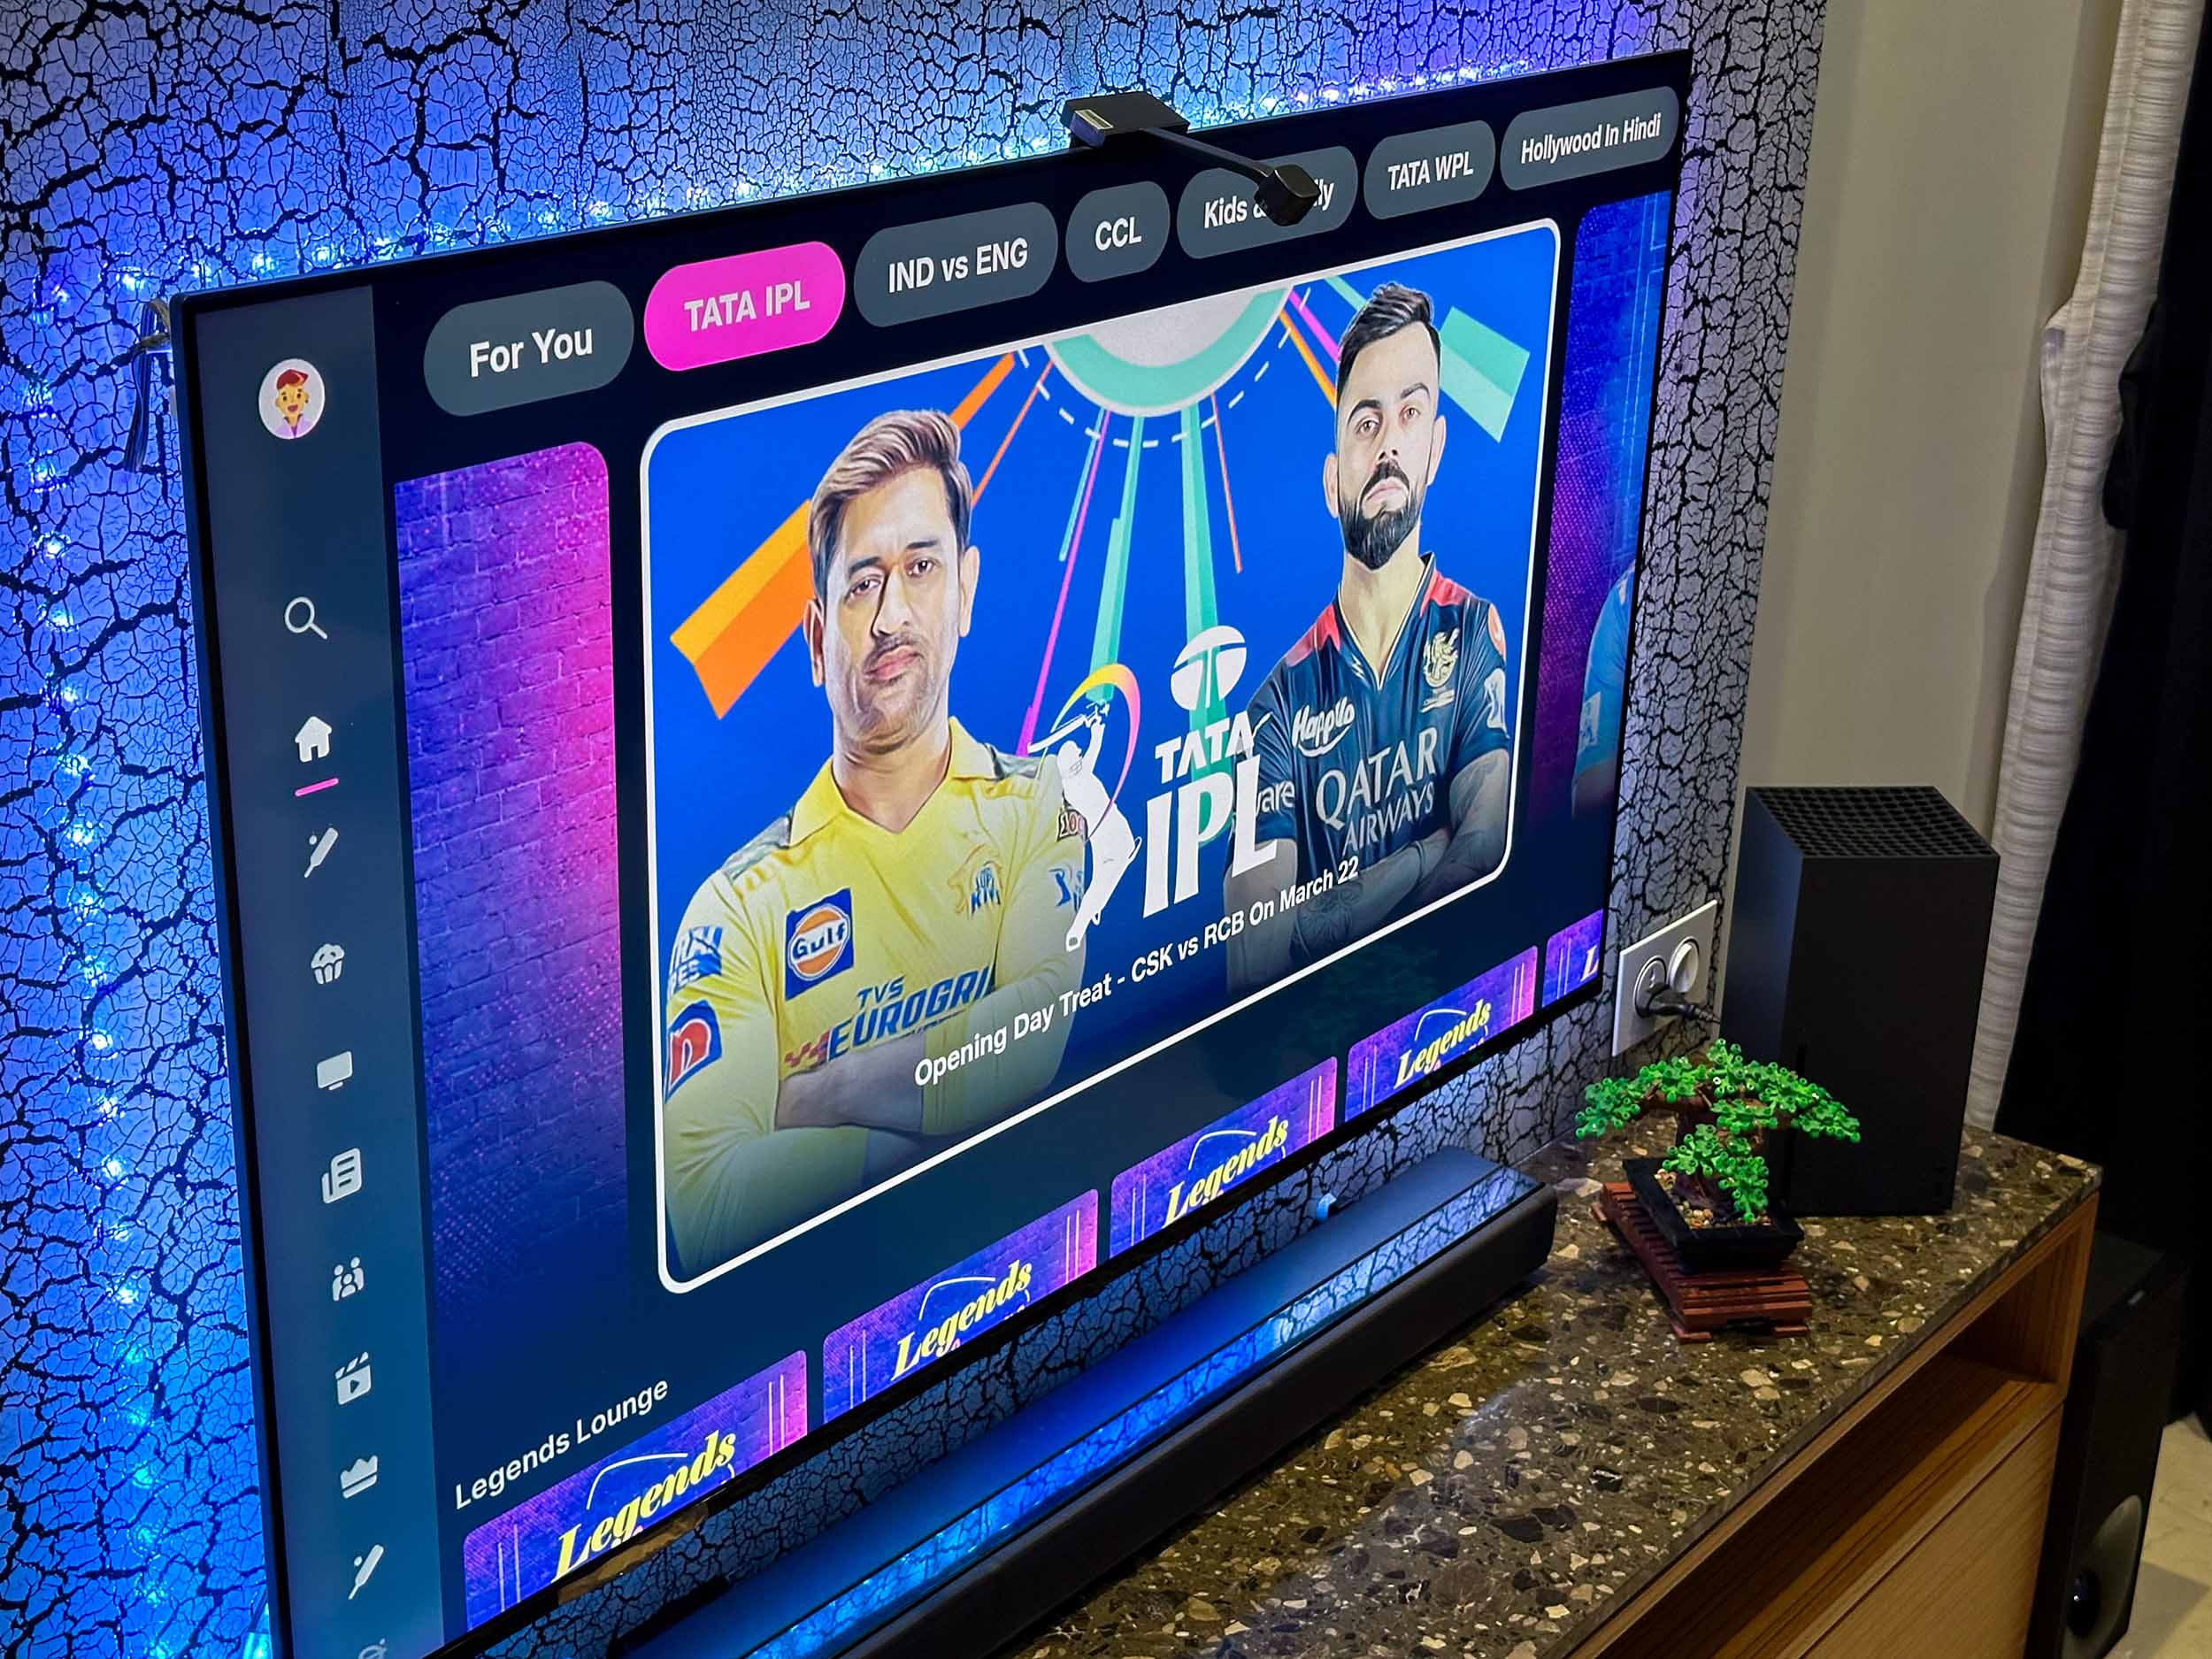 MS Dhoni of Chennai Super Kings and Virat Kohli of Royal Challengers Bangalore in an ad for IPL 2024 on JioCinema on OnePlus Q1 TV fitted with Govee TV LED RGBIC backlight with camera. The TV is next to Lego Bonsai Tree, Xbox Series X, and Sony HT-Z9F soundbar.